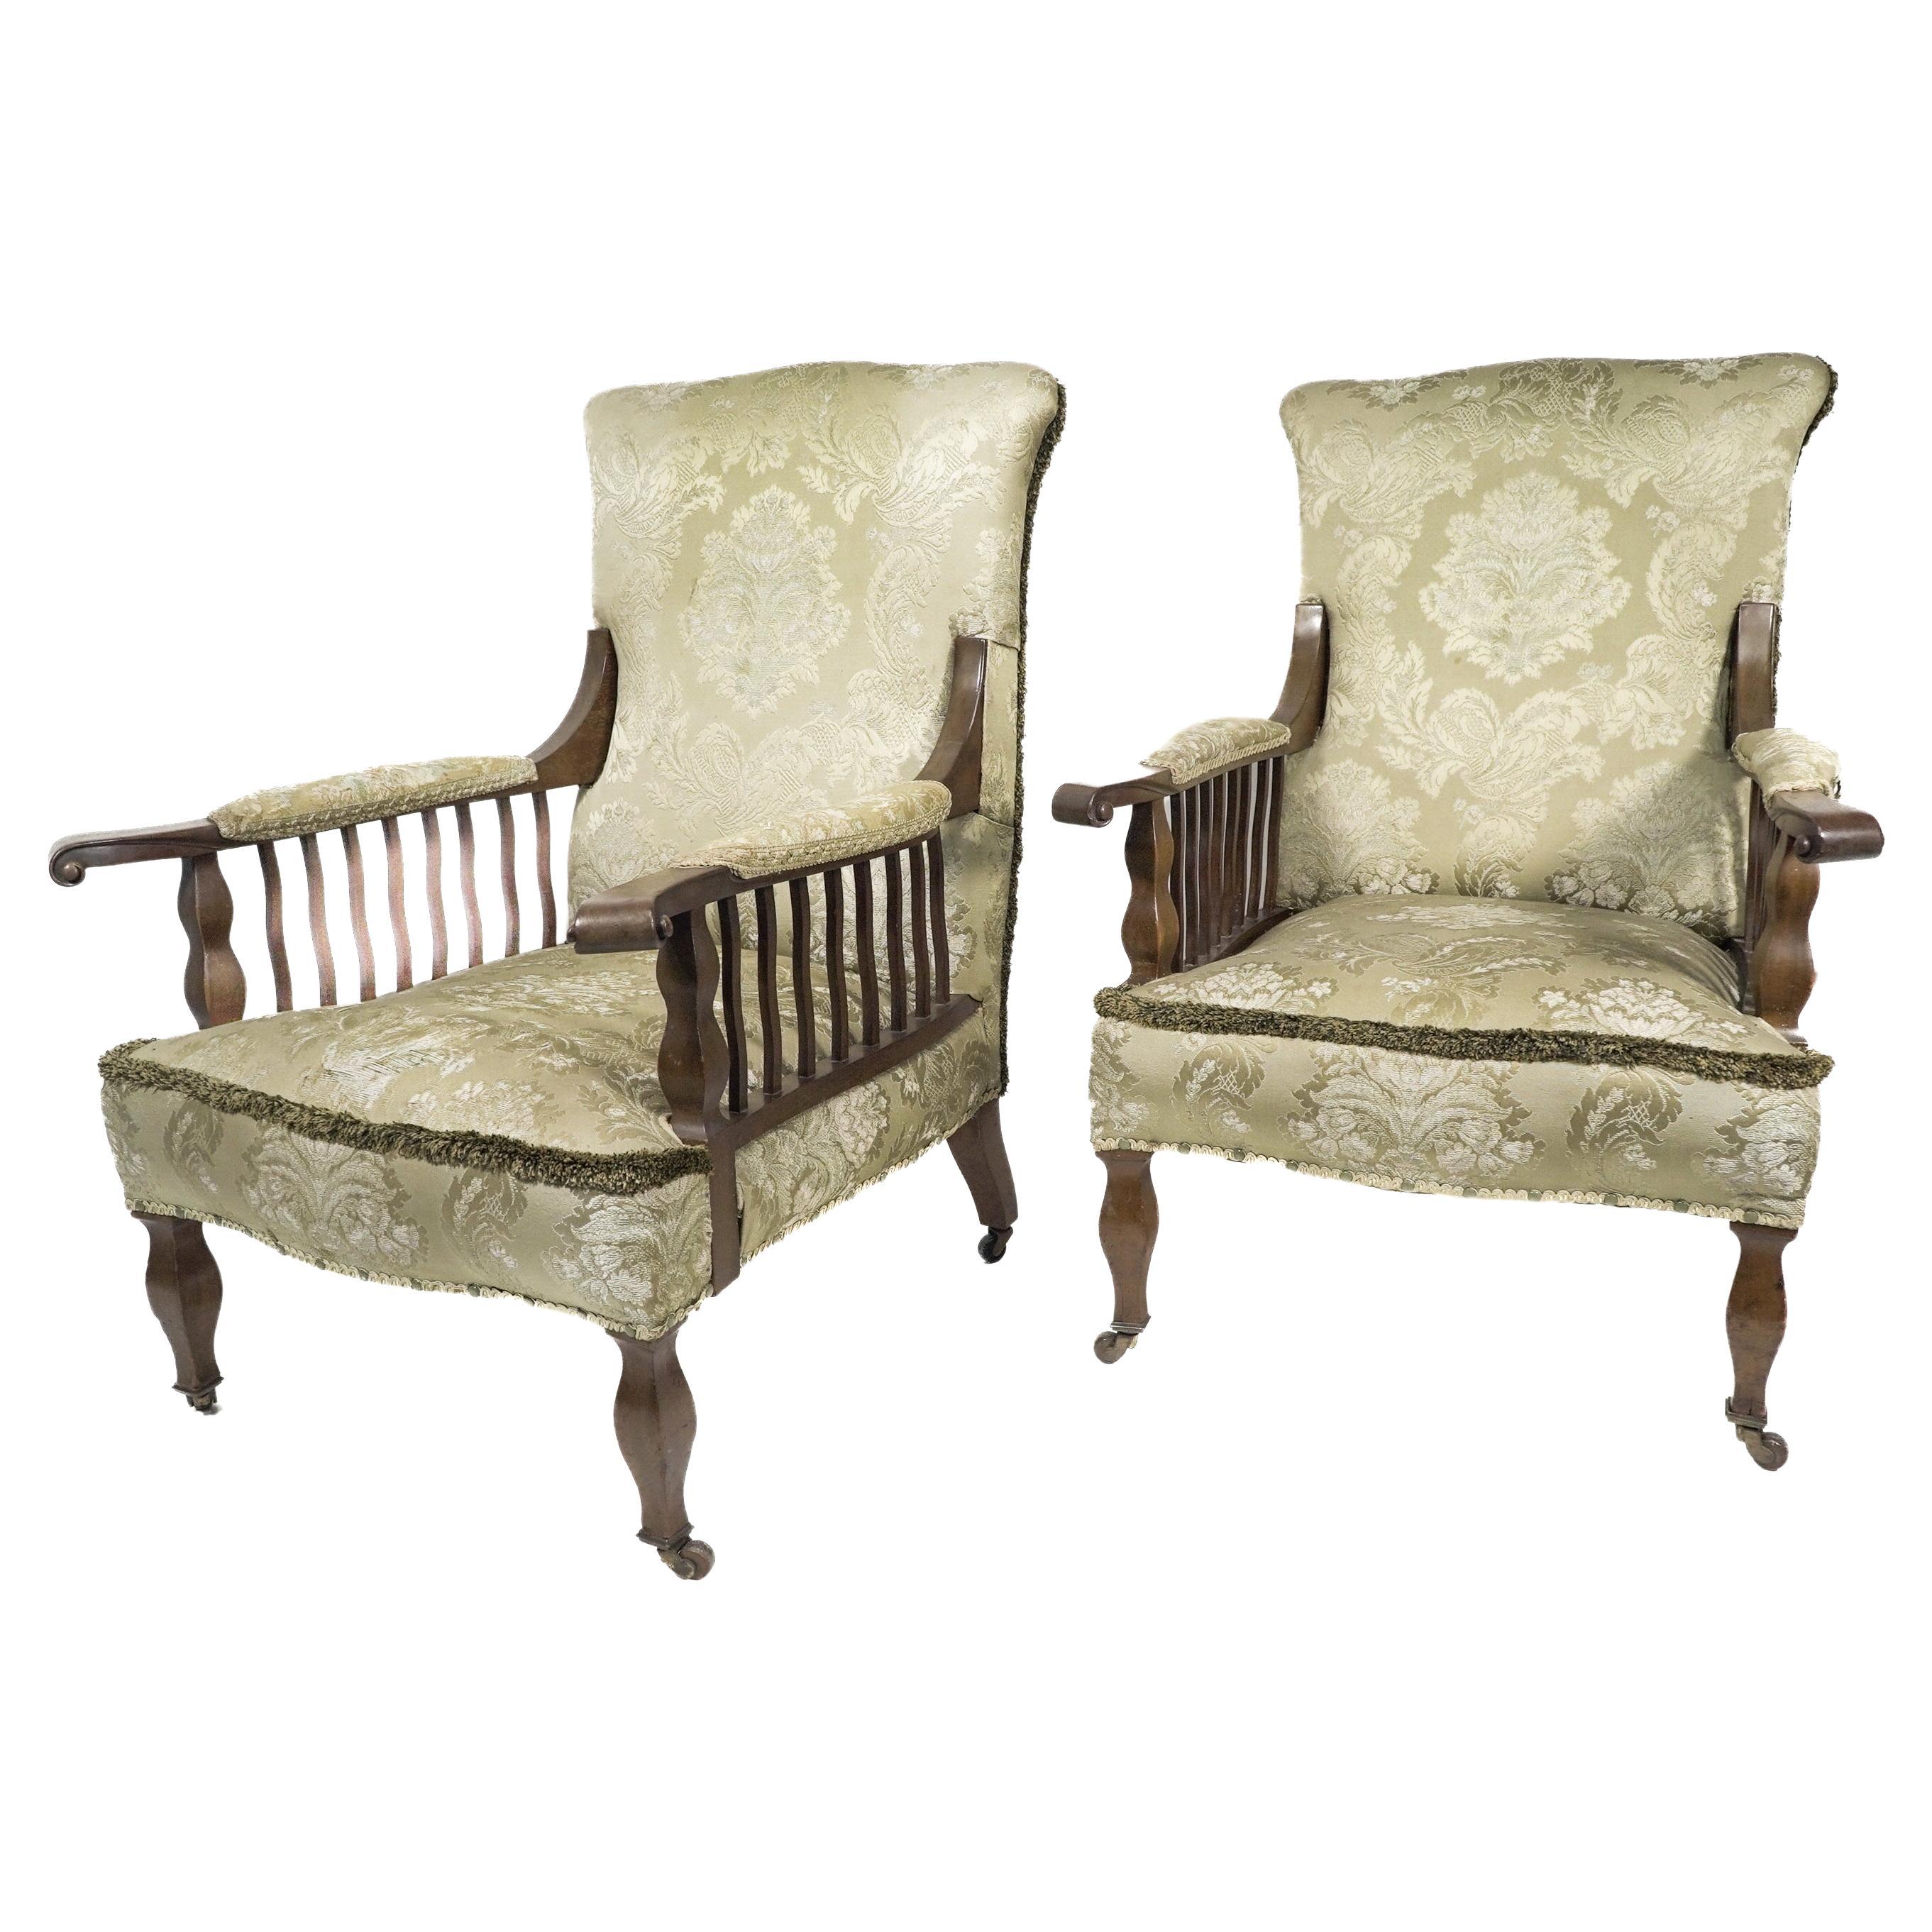 George Jack for Morris and Co. A Pair of Mahogany Saville armchairs For Sale